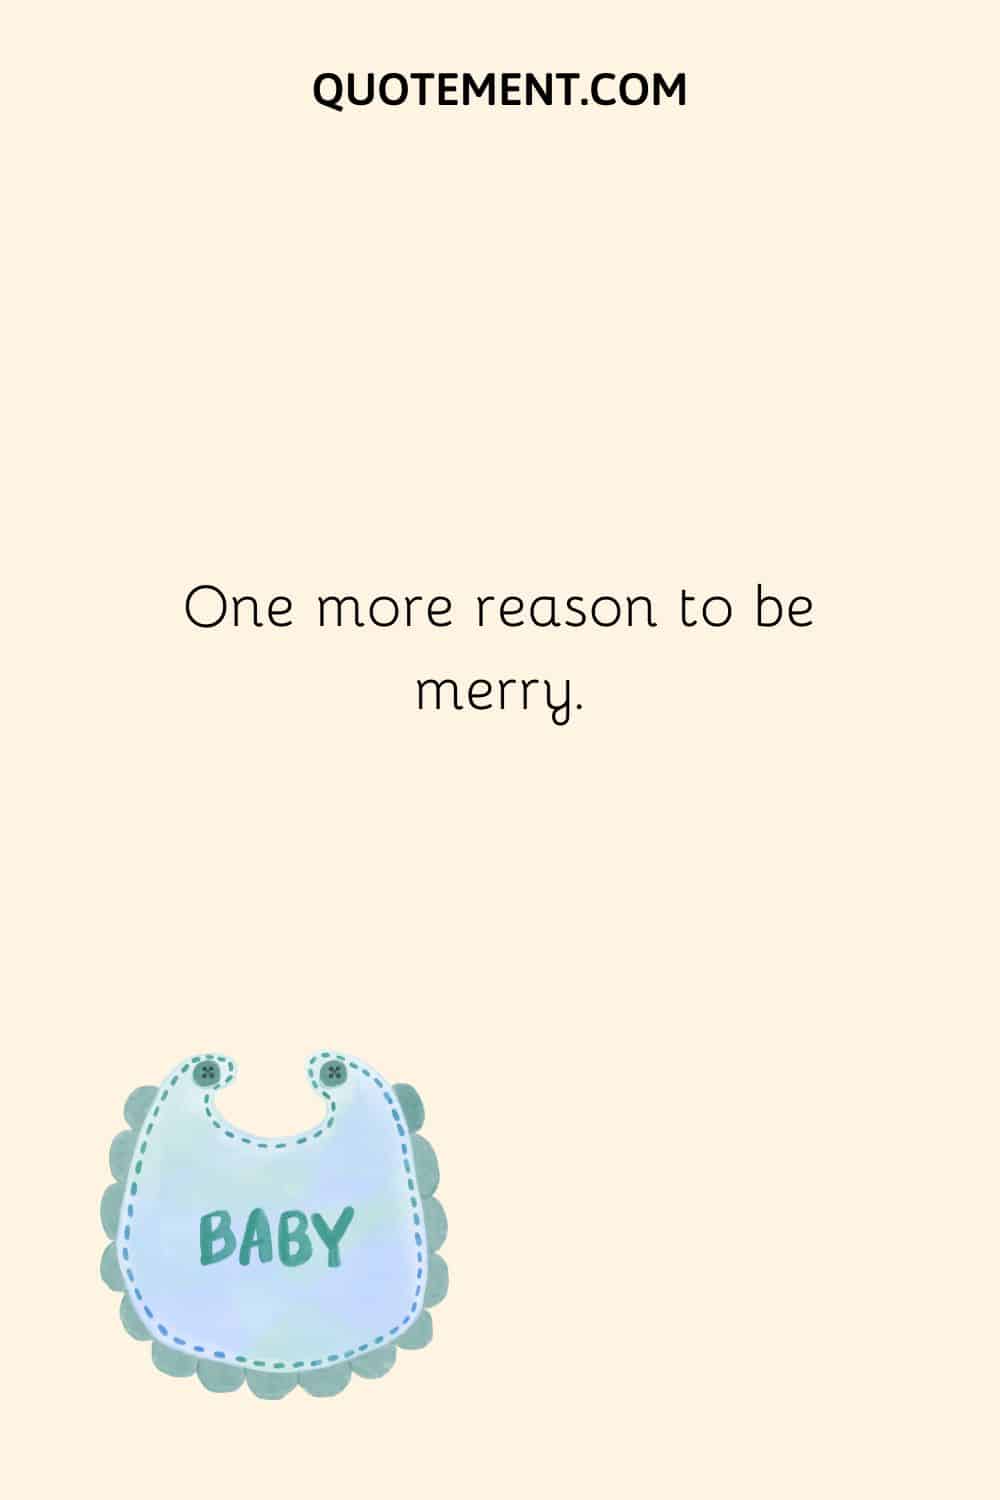 One more reason to be merry.